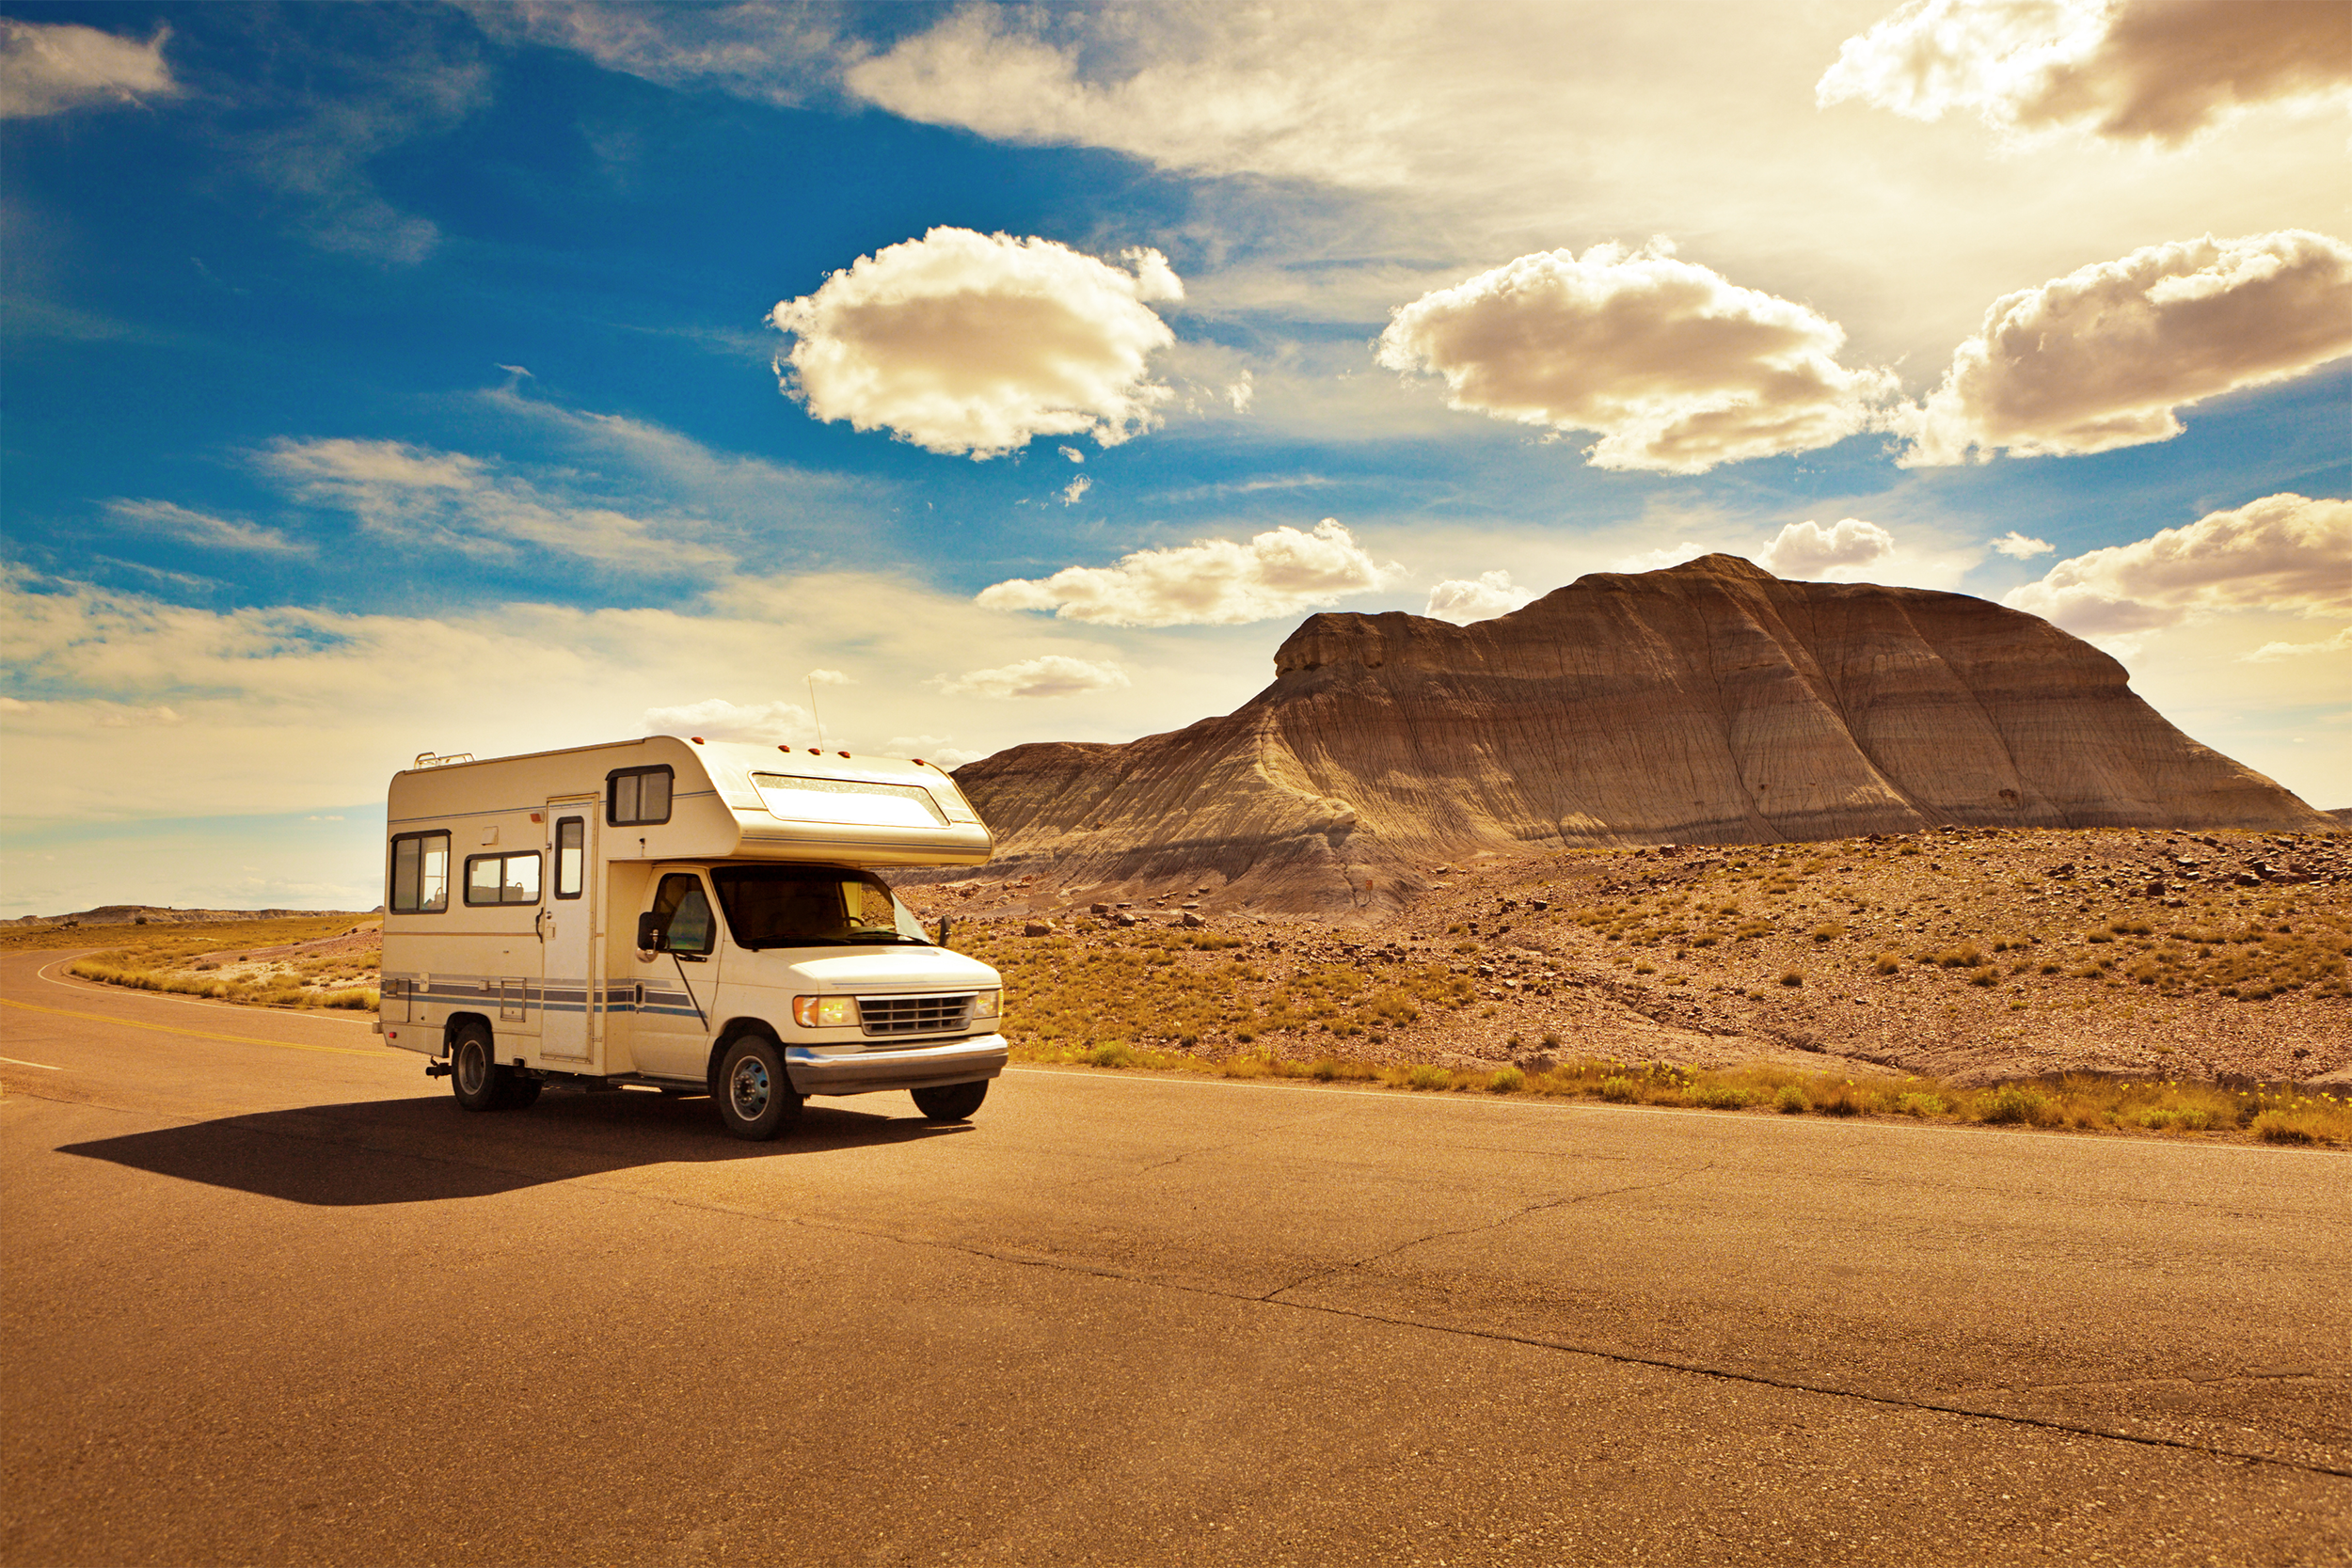 The best deals on recreational vehicles tend to come in the fall. If you’re looking, the time to cash in on discounts may be now. But no amount of luck and money saved will be worth the bargain if you come home with the wrong rig and a serious case of buyer’s remorse. We consulted the experts, including people who live in them, love them, sell them, rent them, and write about them while traveling full time, to help you understand some of the most critical considerations and hidden costs. (It’s important to note that several of the experts profiled here, like so many members of the general public, use the term RV interchangeably with motorhomes and trailers.)